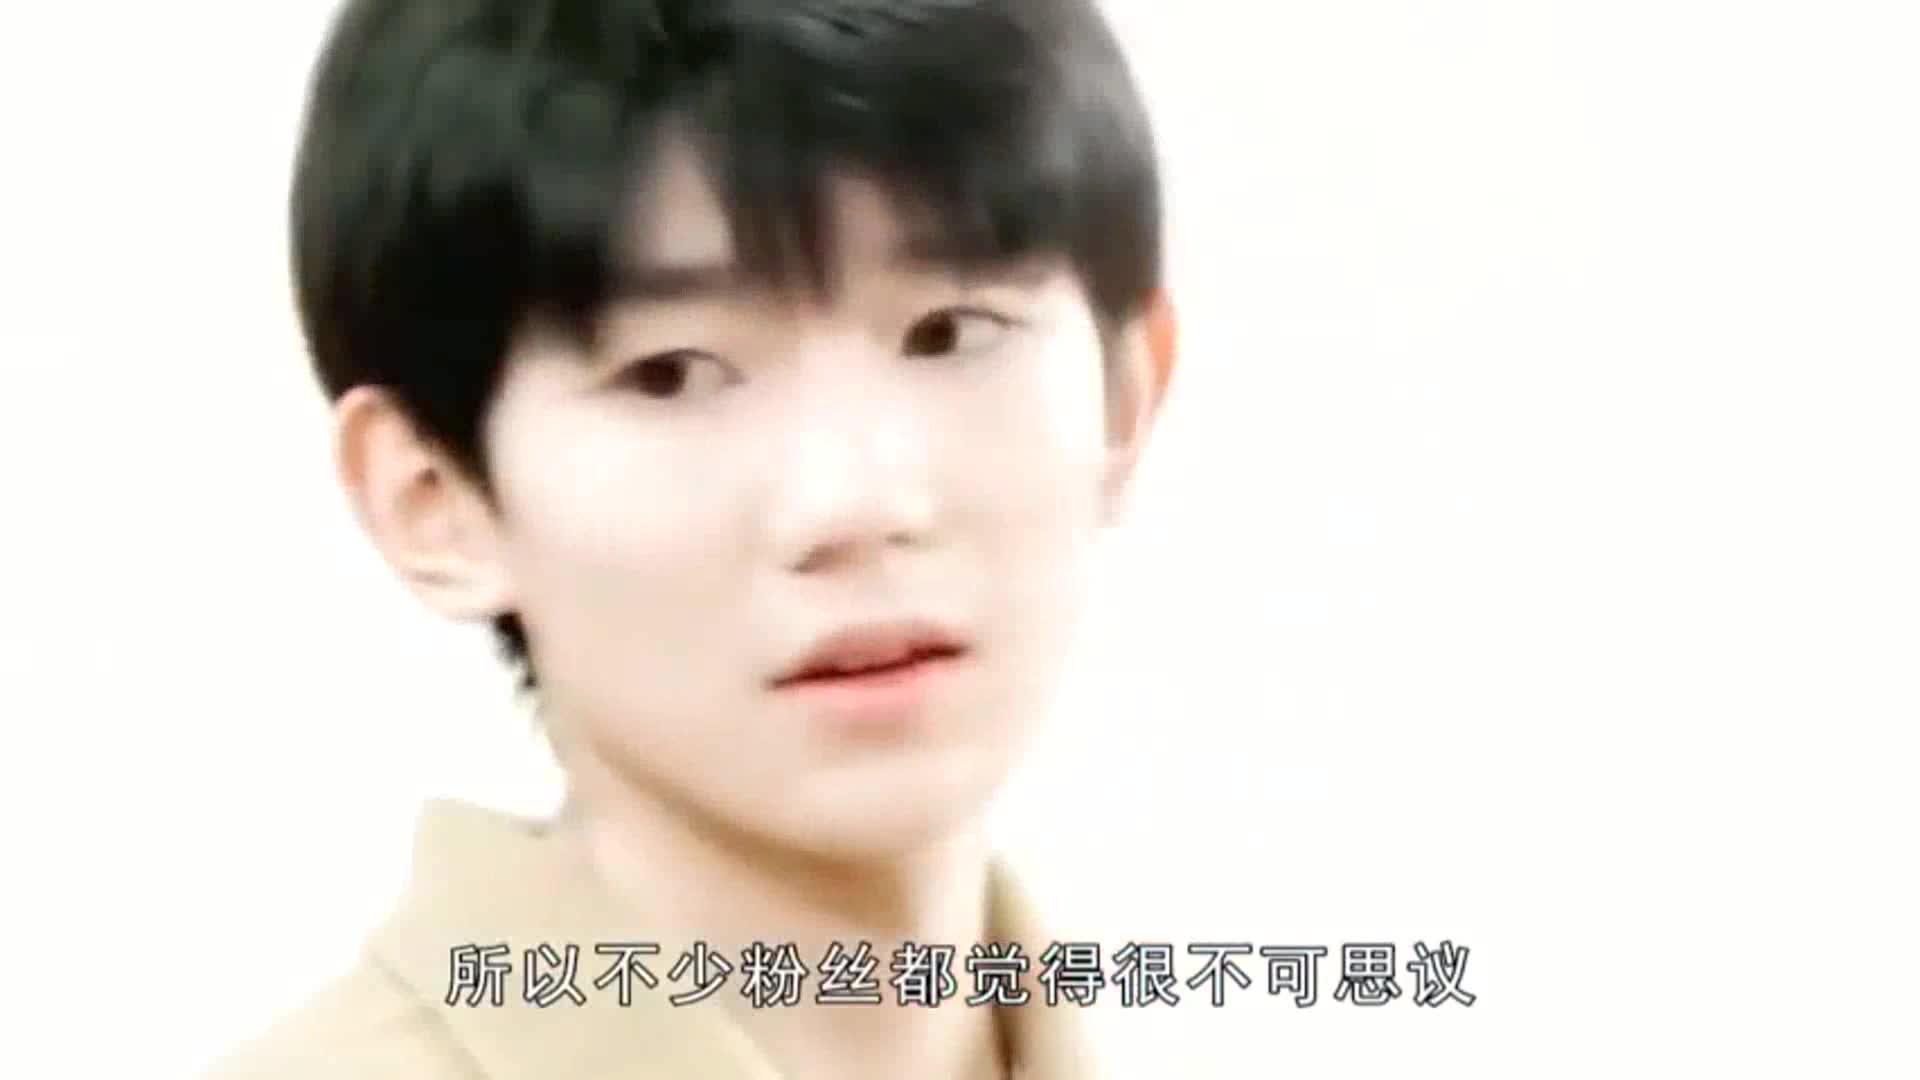 Wang Yuan once again announced good news to the government. After seeing his 